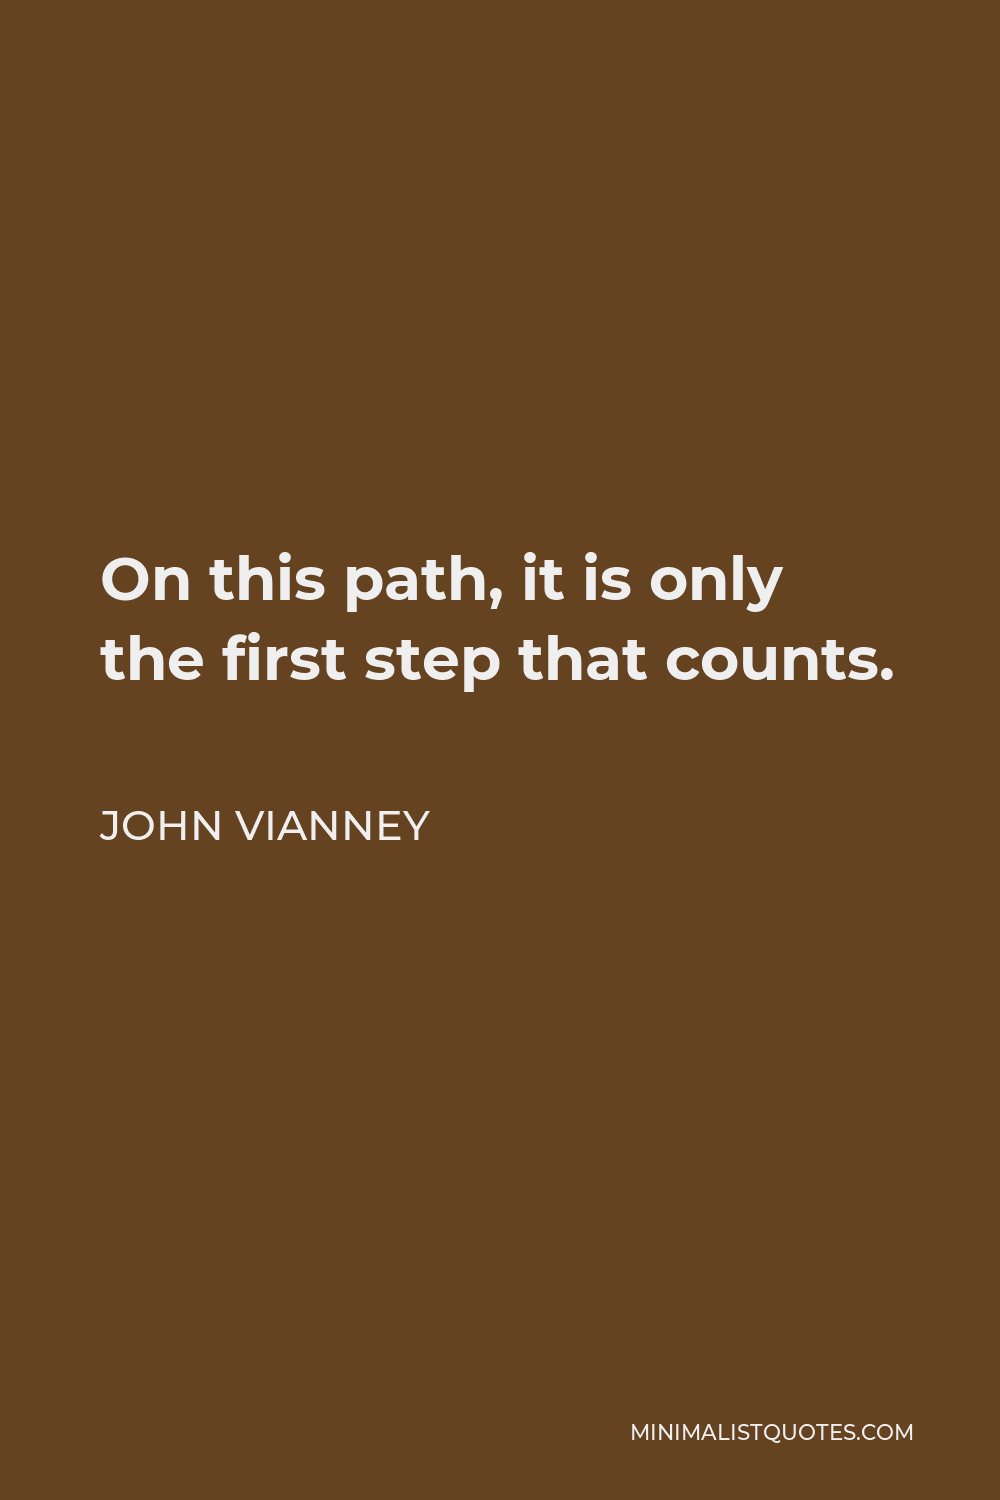 John Vianney Quote - On this path, it is only the first step that counts.